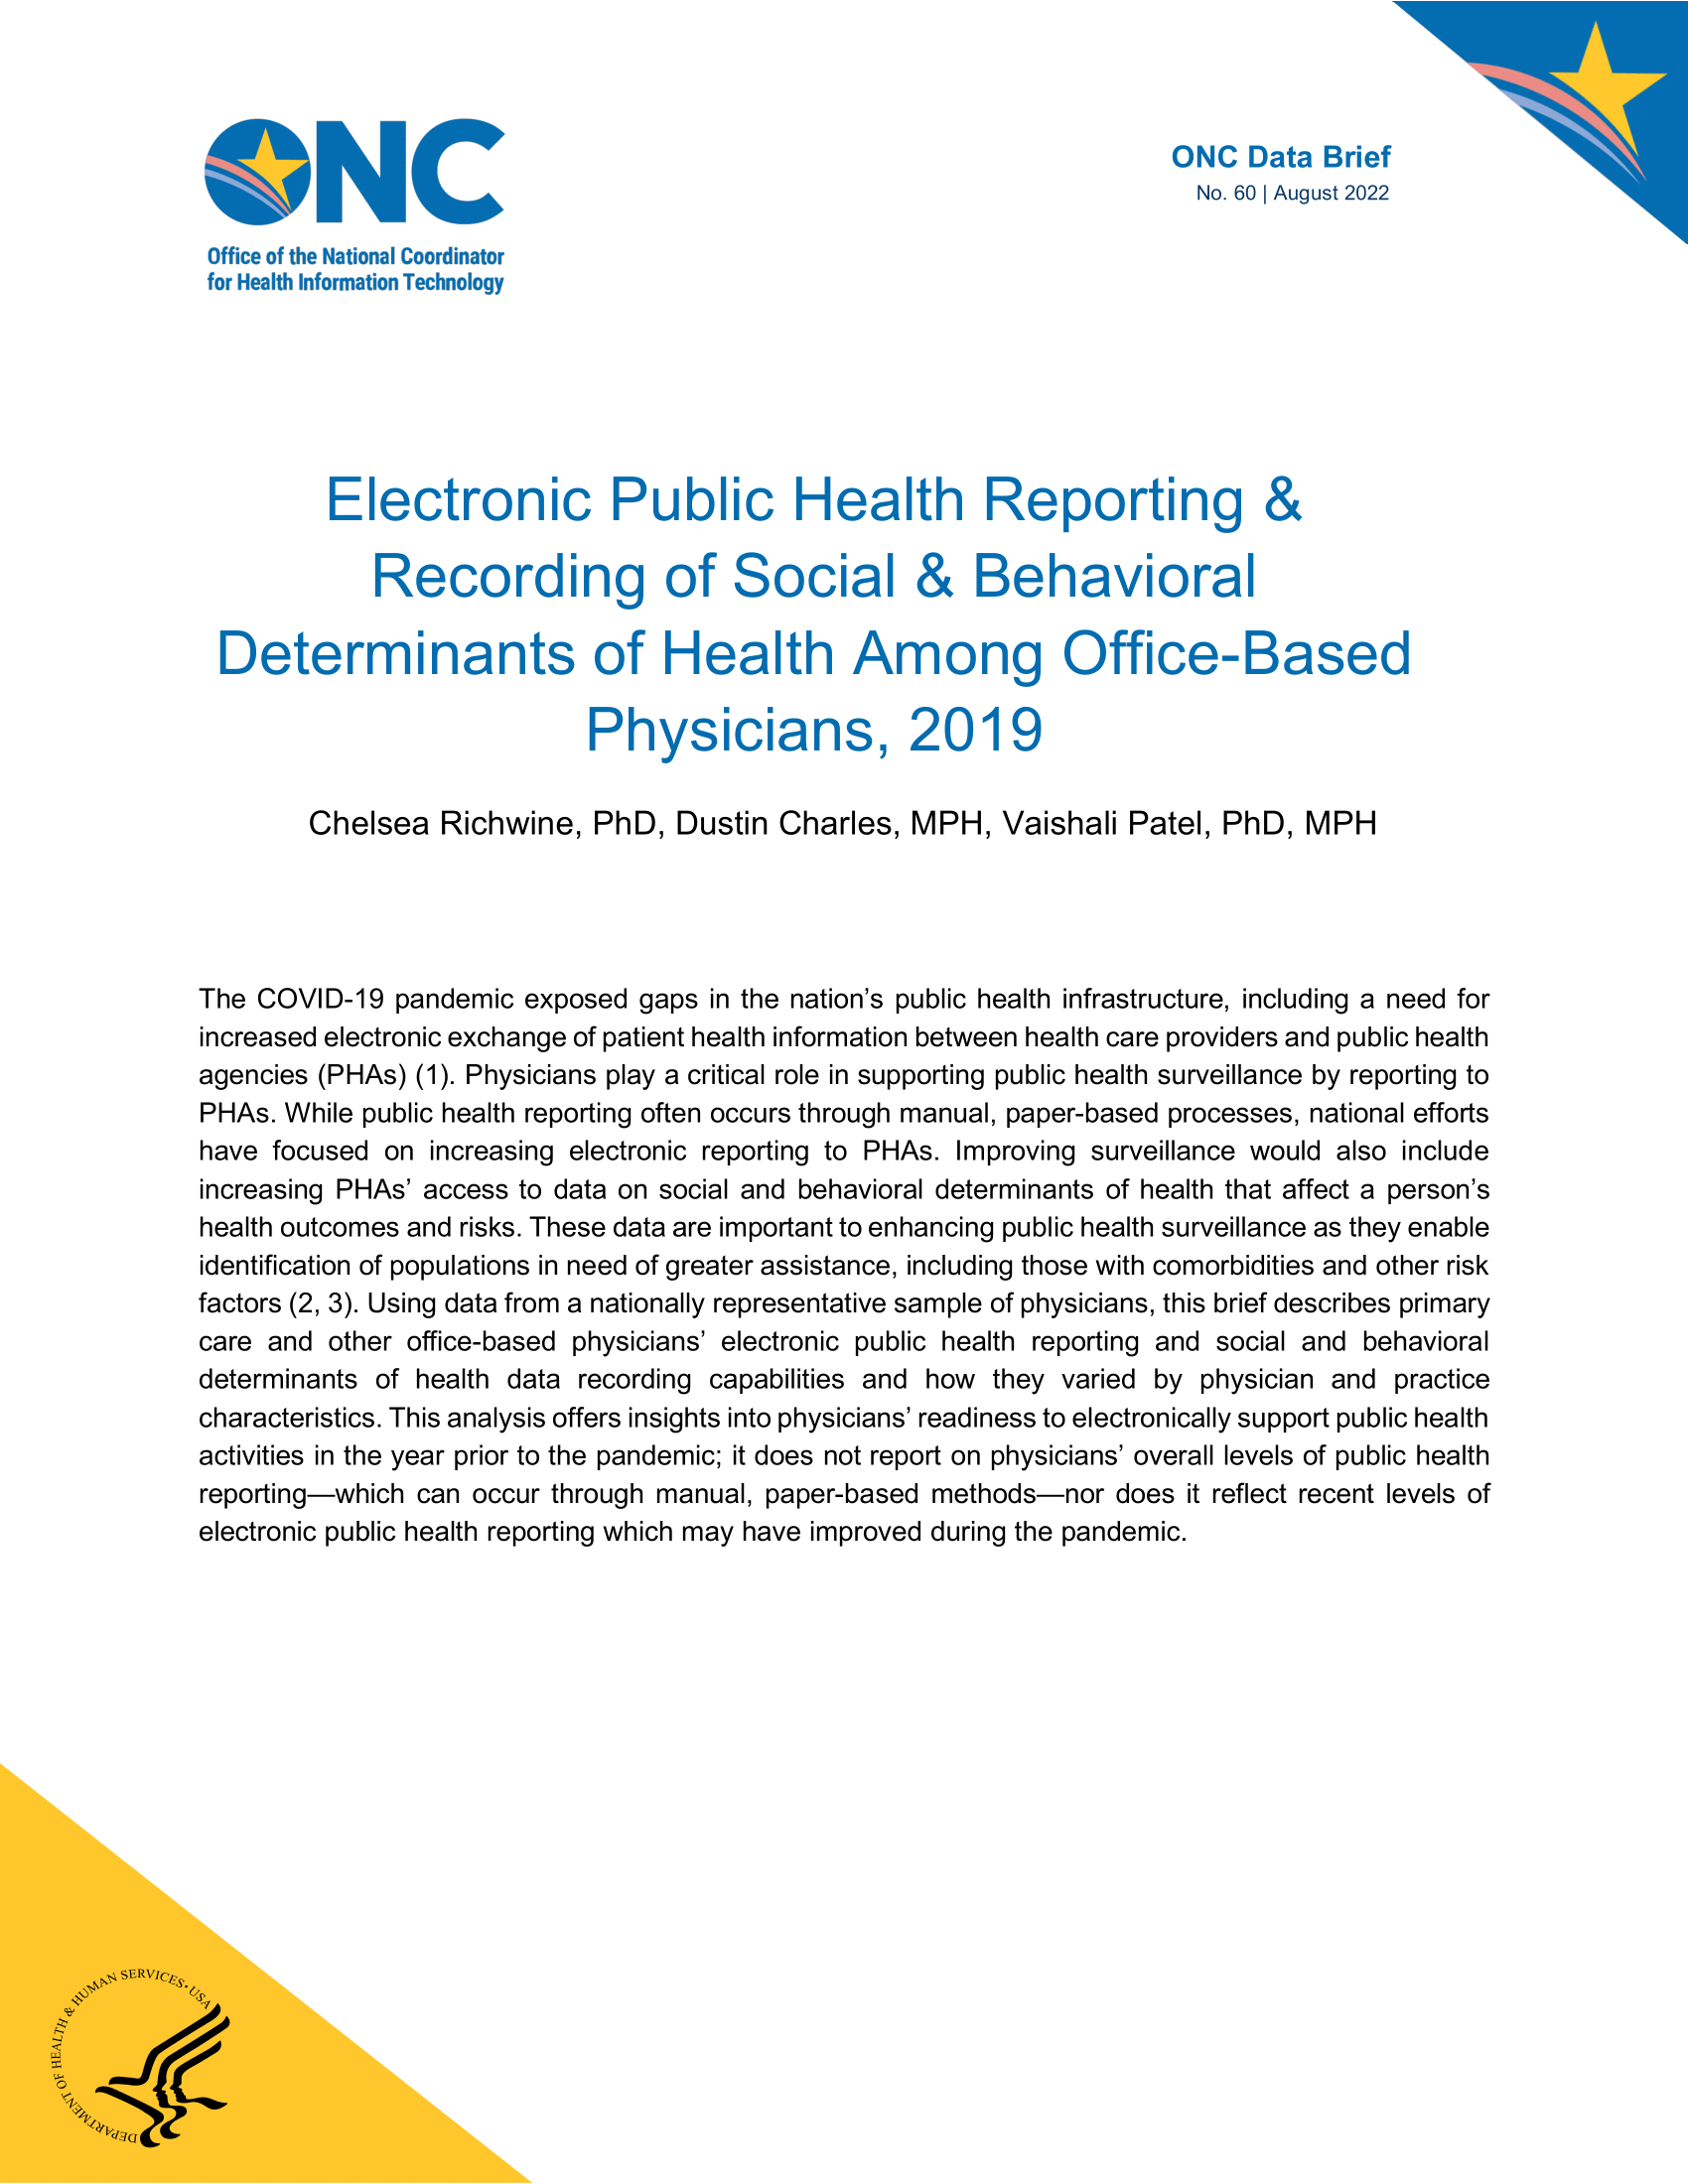 Electronic Public Health Reporting & Recording of Social & Behavioral Determinants of Health Among Office-Based Physicians, 2019